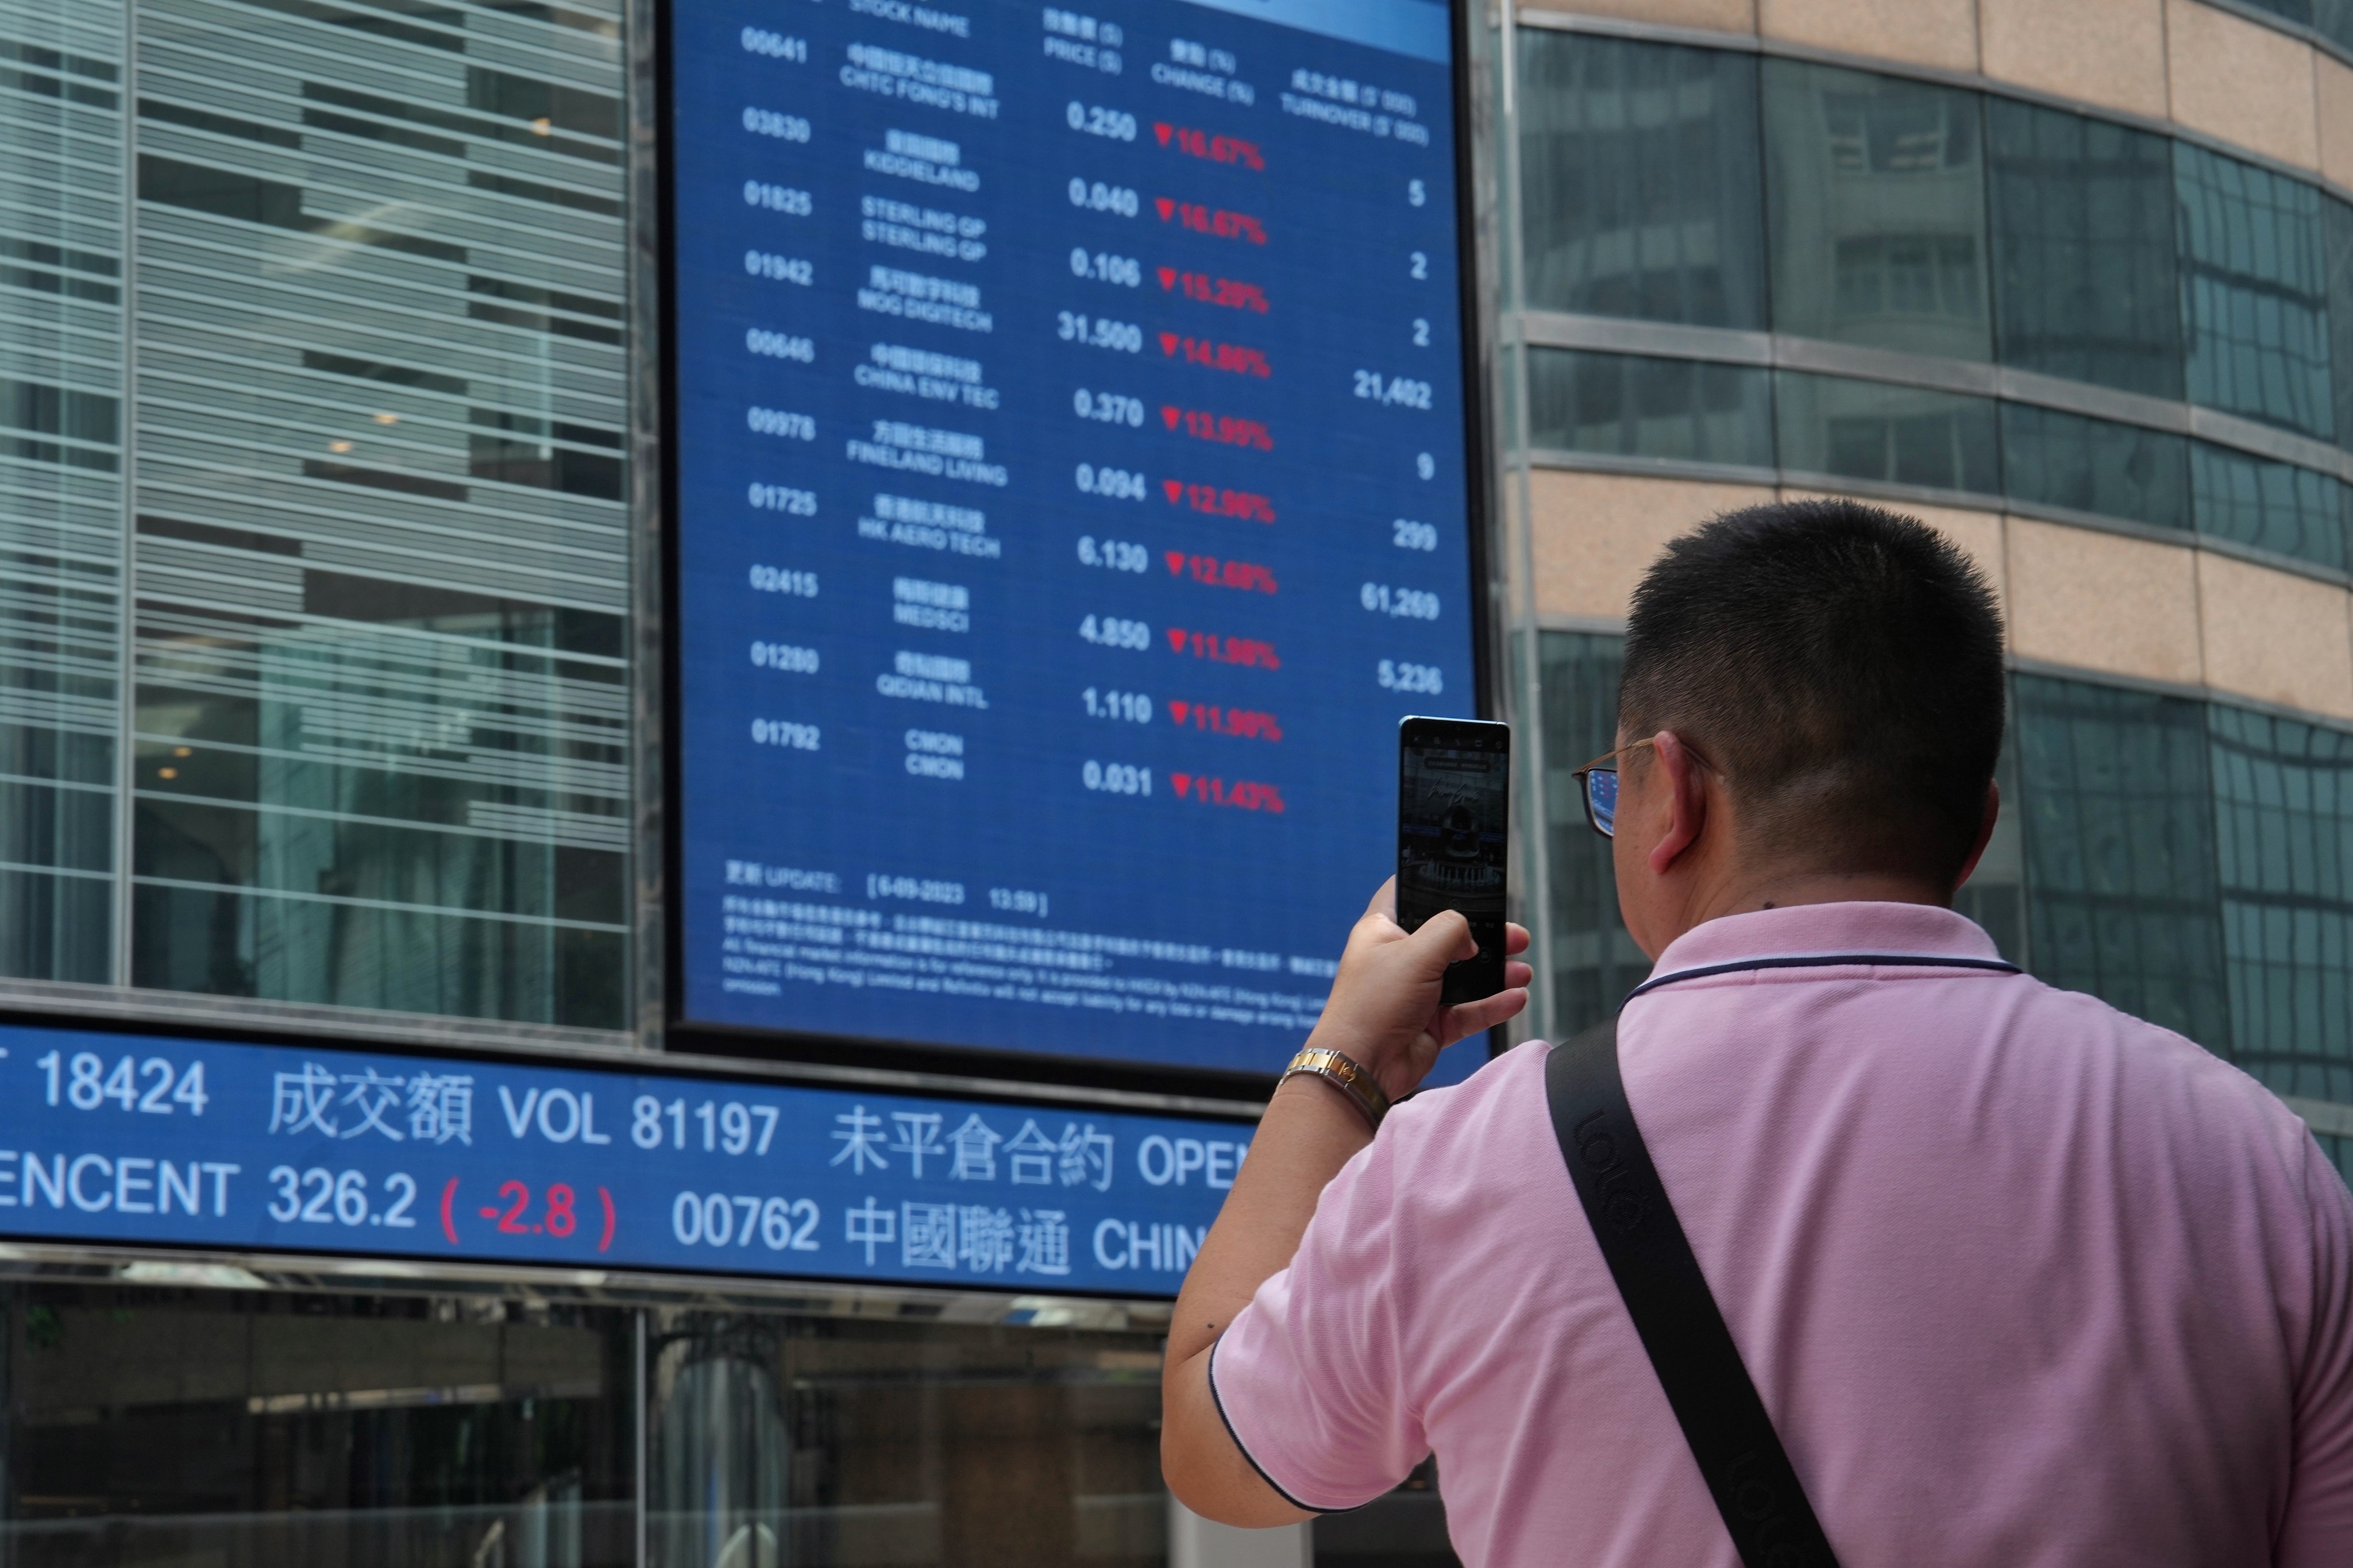 A man takes pictures at the  piazza in front of the headquarters of Hong Kong Exchanges and Clearing Limited  (HKEX), Central. Photo: Elson LI